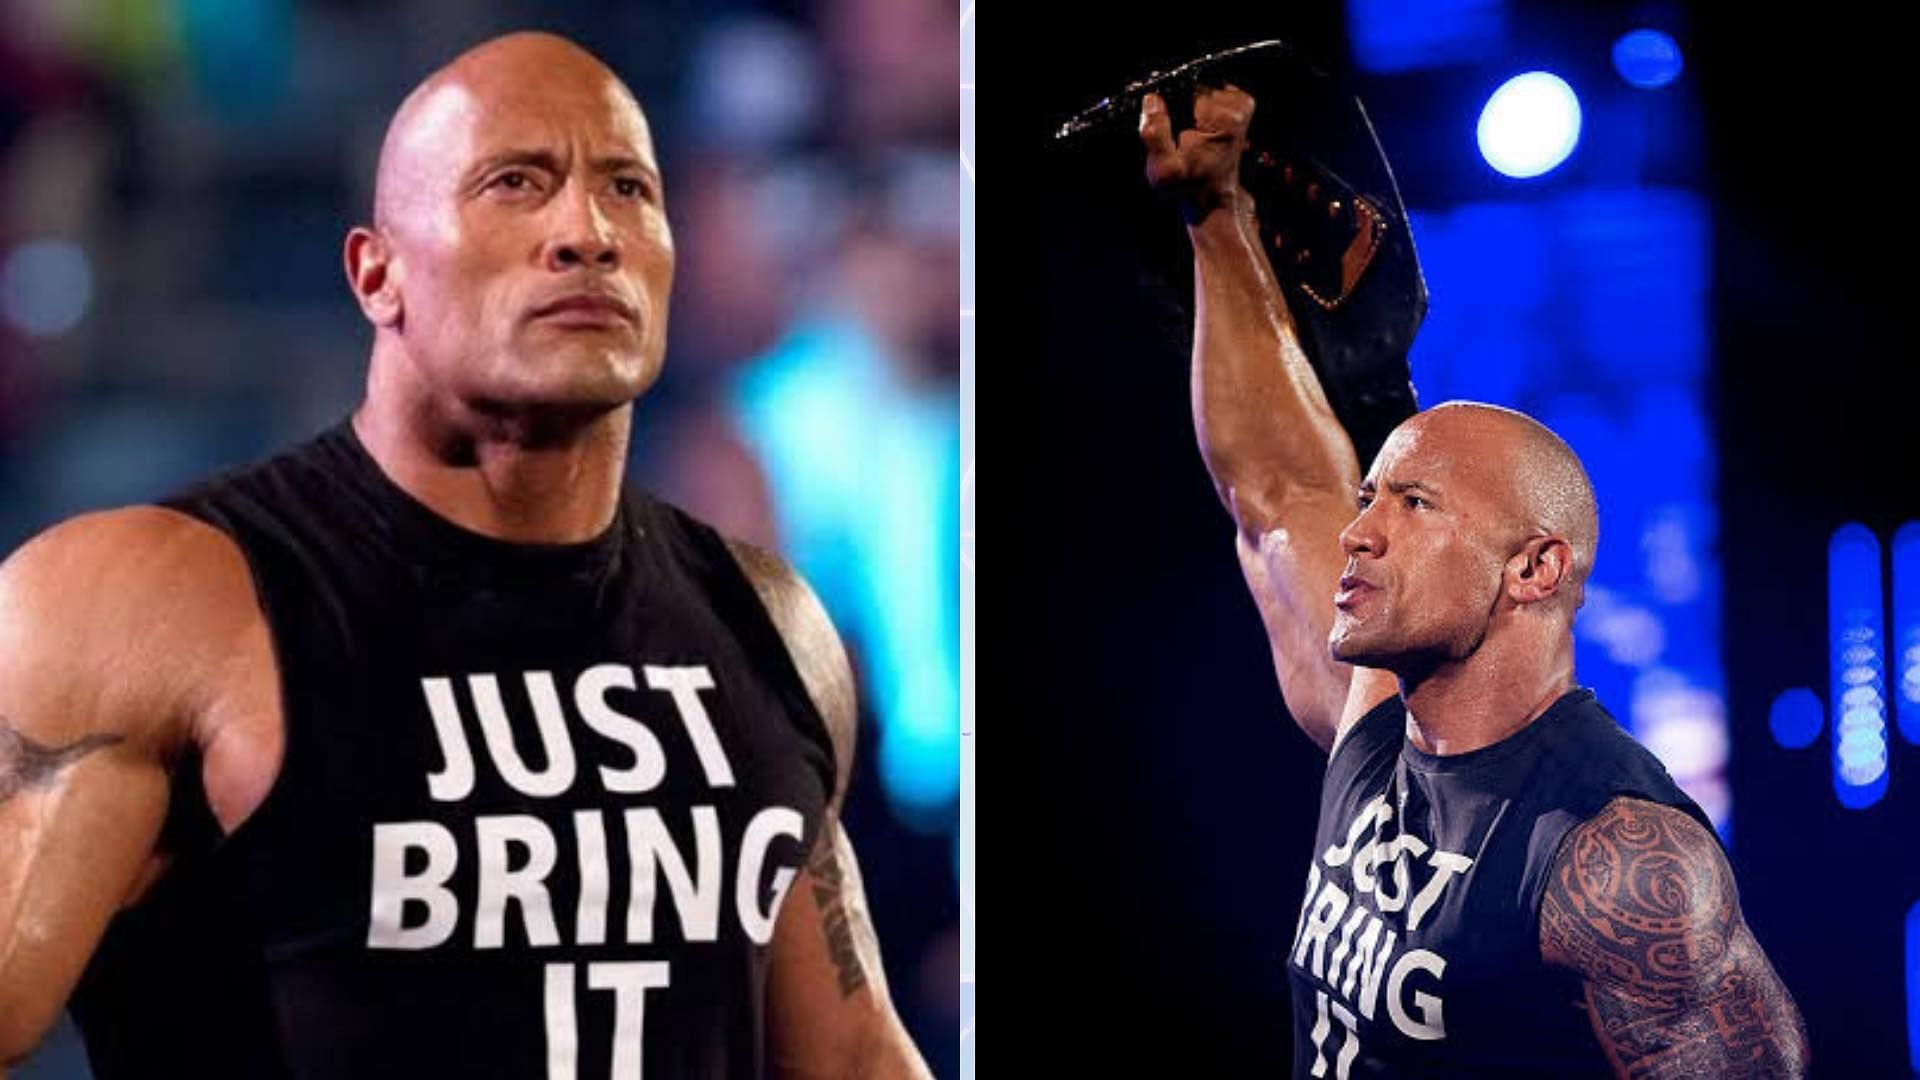 The Most Electrifying Man in Sports Entertainment, WWE Superstar The Rock